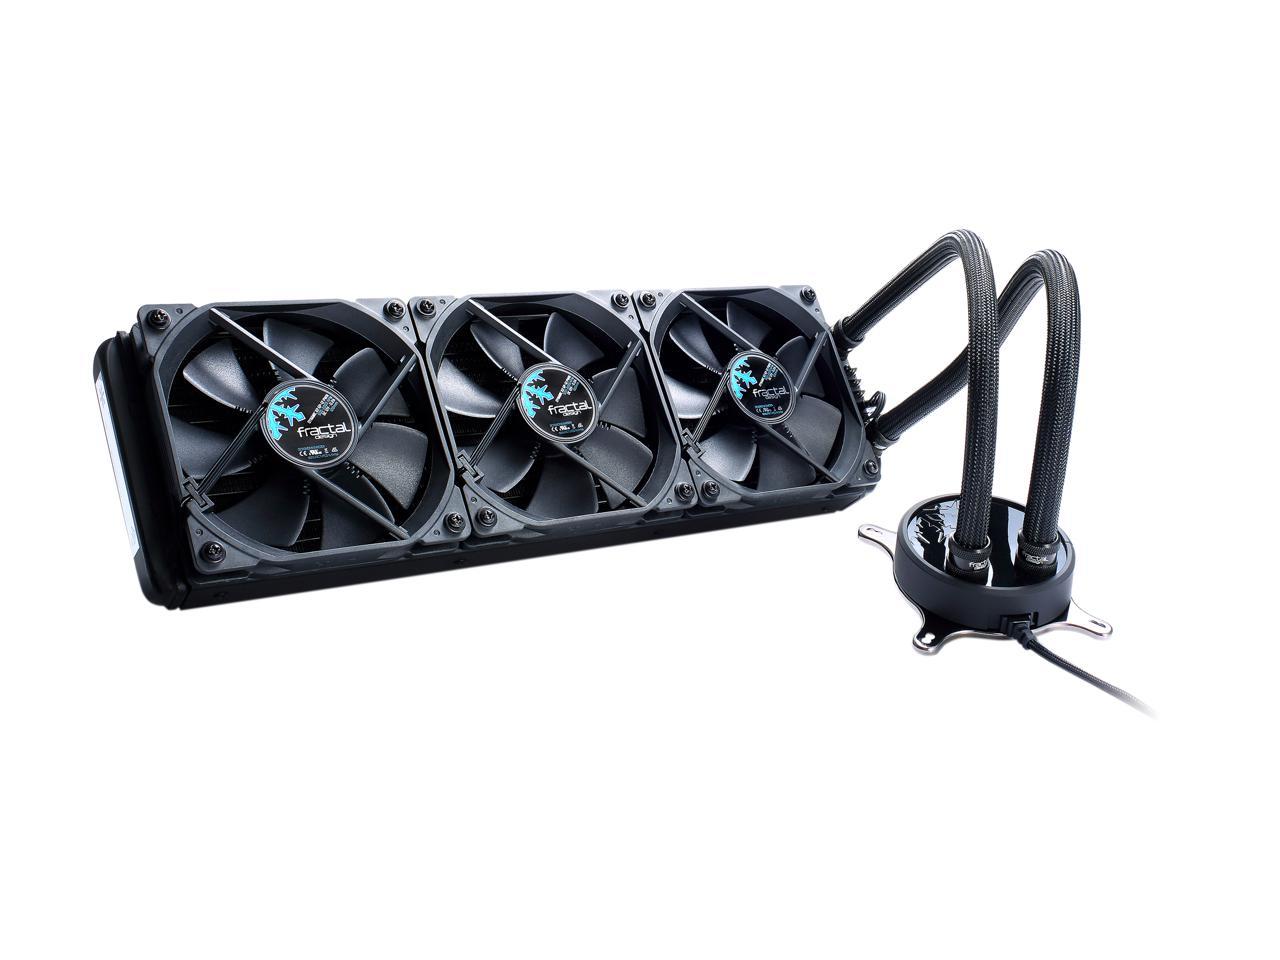 Fractal Design Celsius S36 Blackout 360Mm Silent High Performance Slim Expandable All-In-One Cpu Liquid / Water Cooler